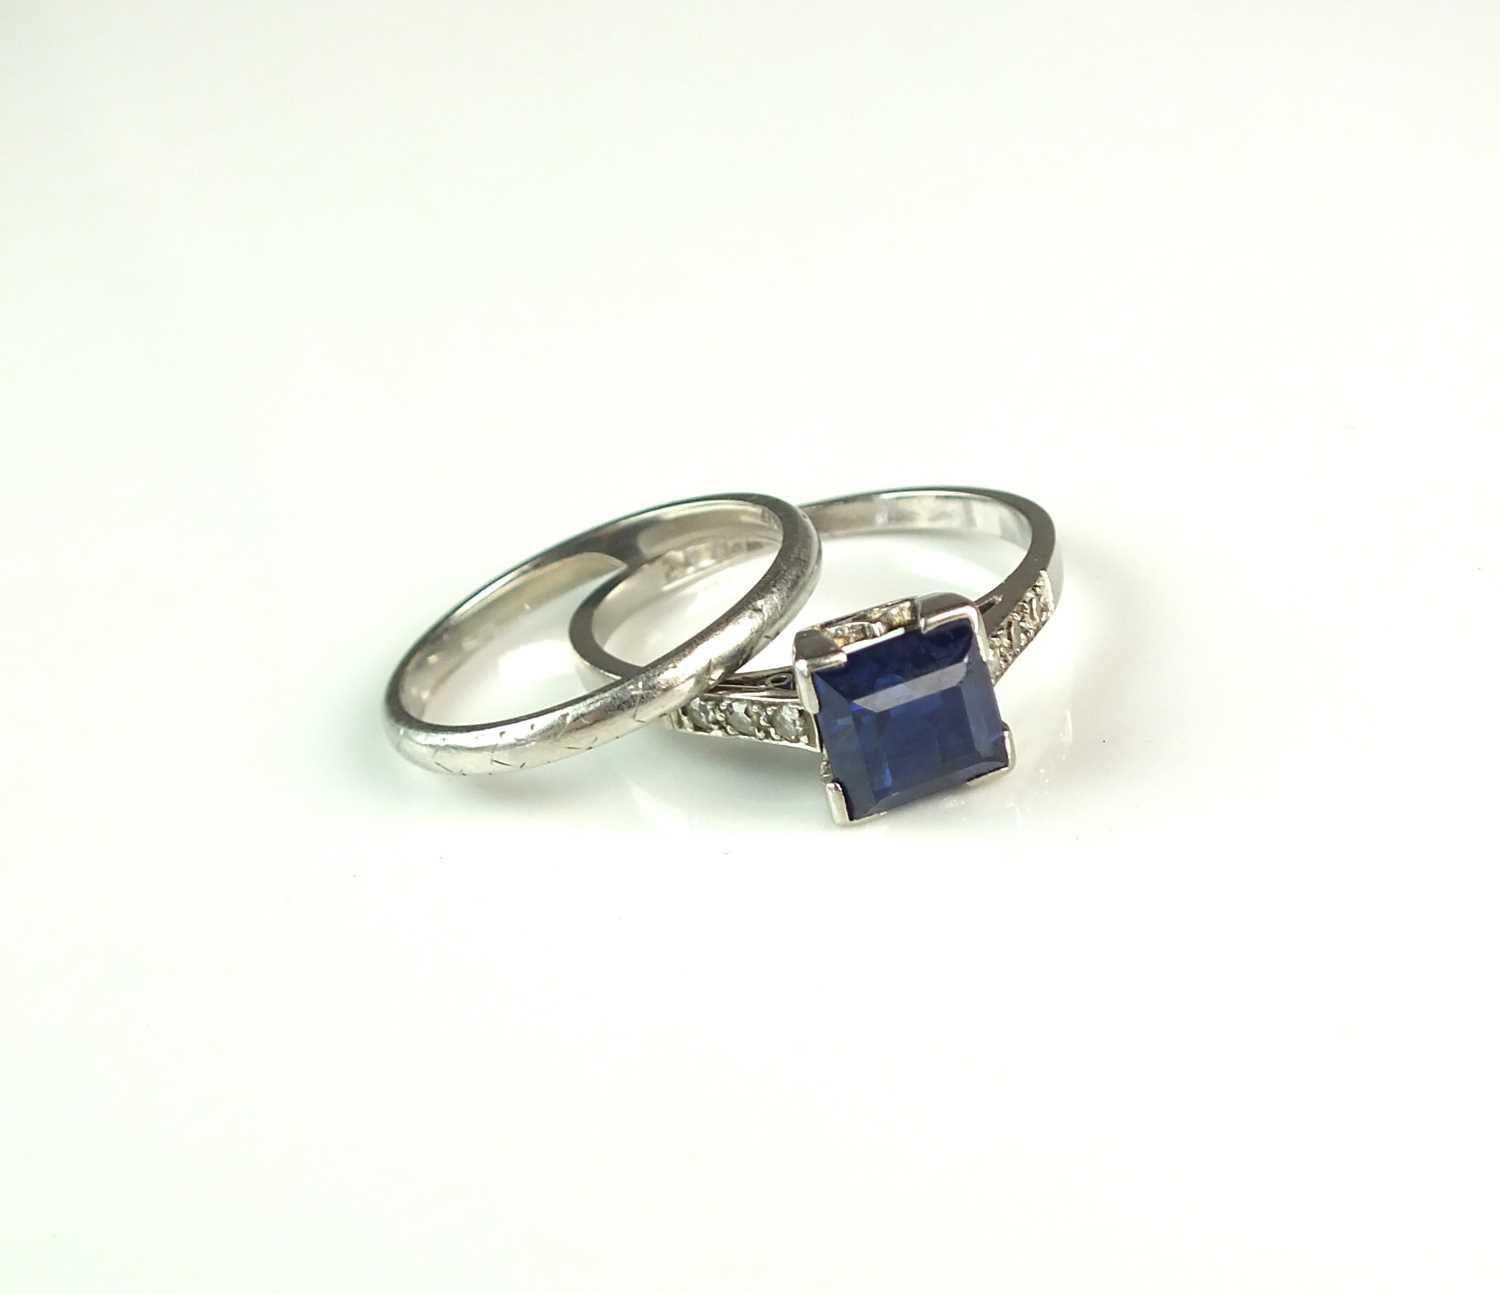 Lot 56 - An Art Deco single stone sapphire ring and a wedding band